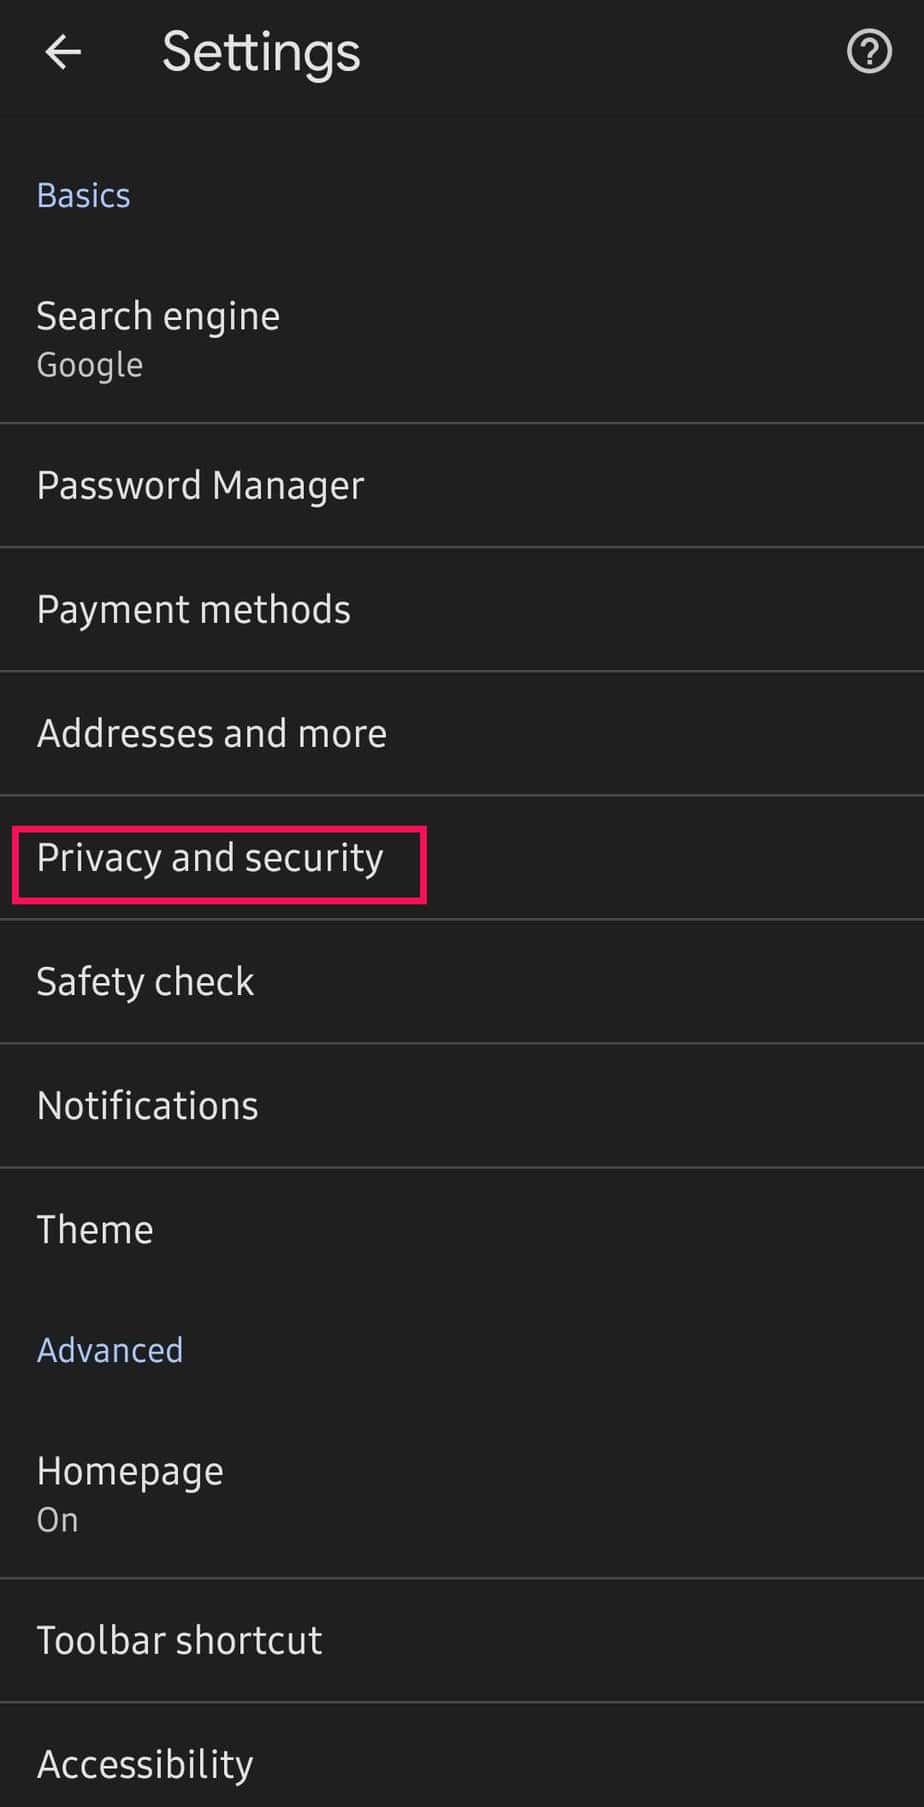 click-on-privacy-and-security